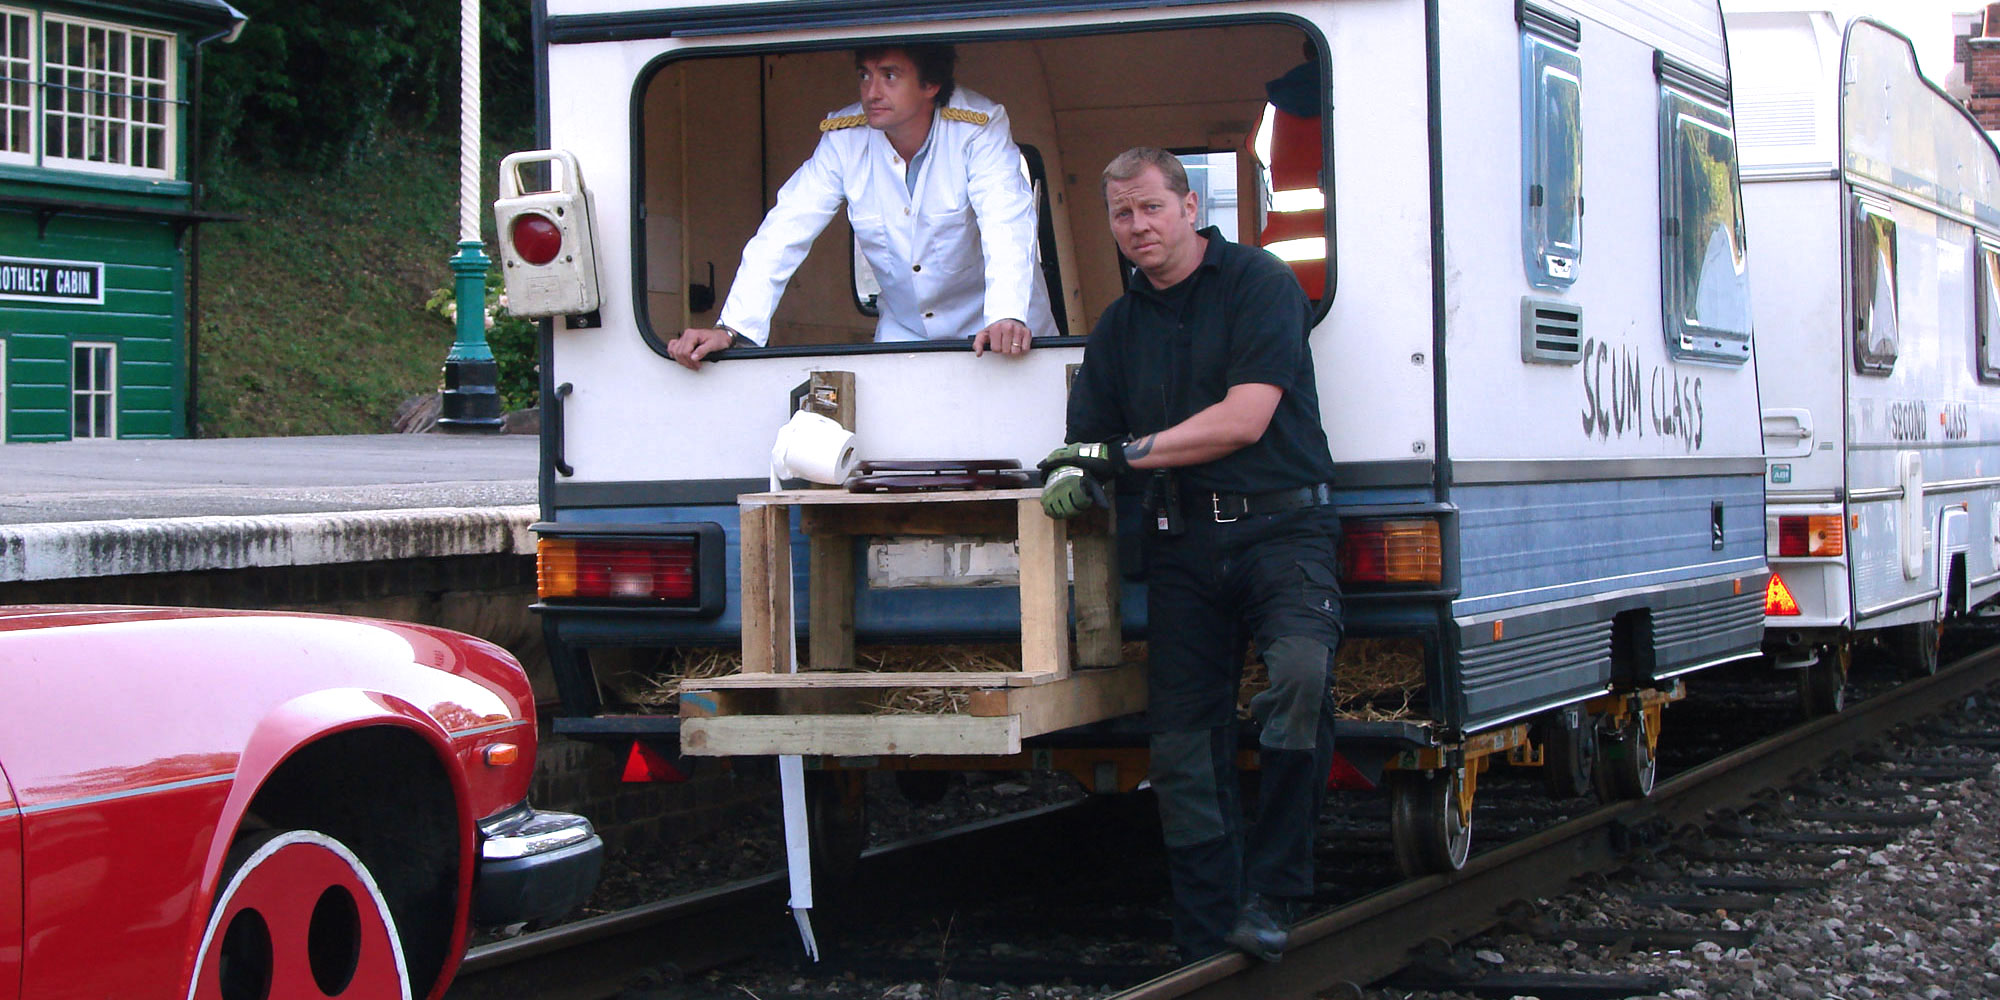 Do you want a vehicle engineered to be adapted to travel on a railway track and tow caravans?